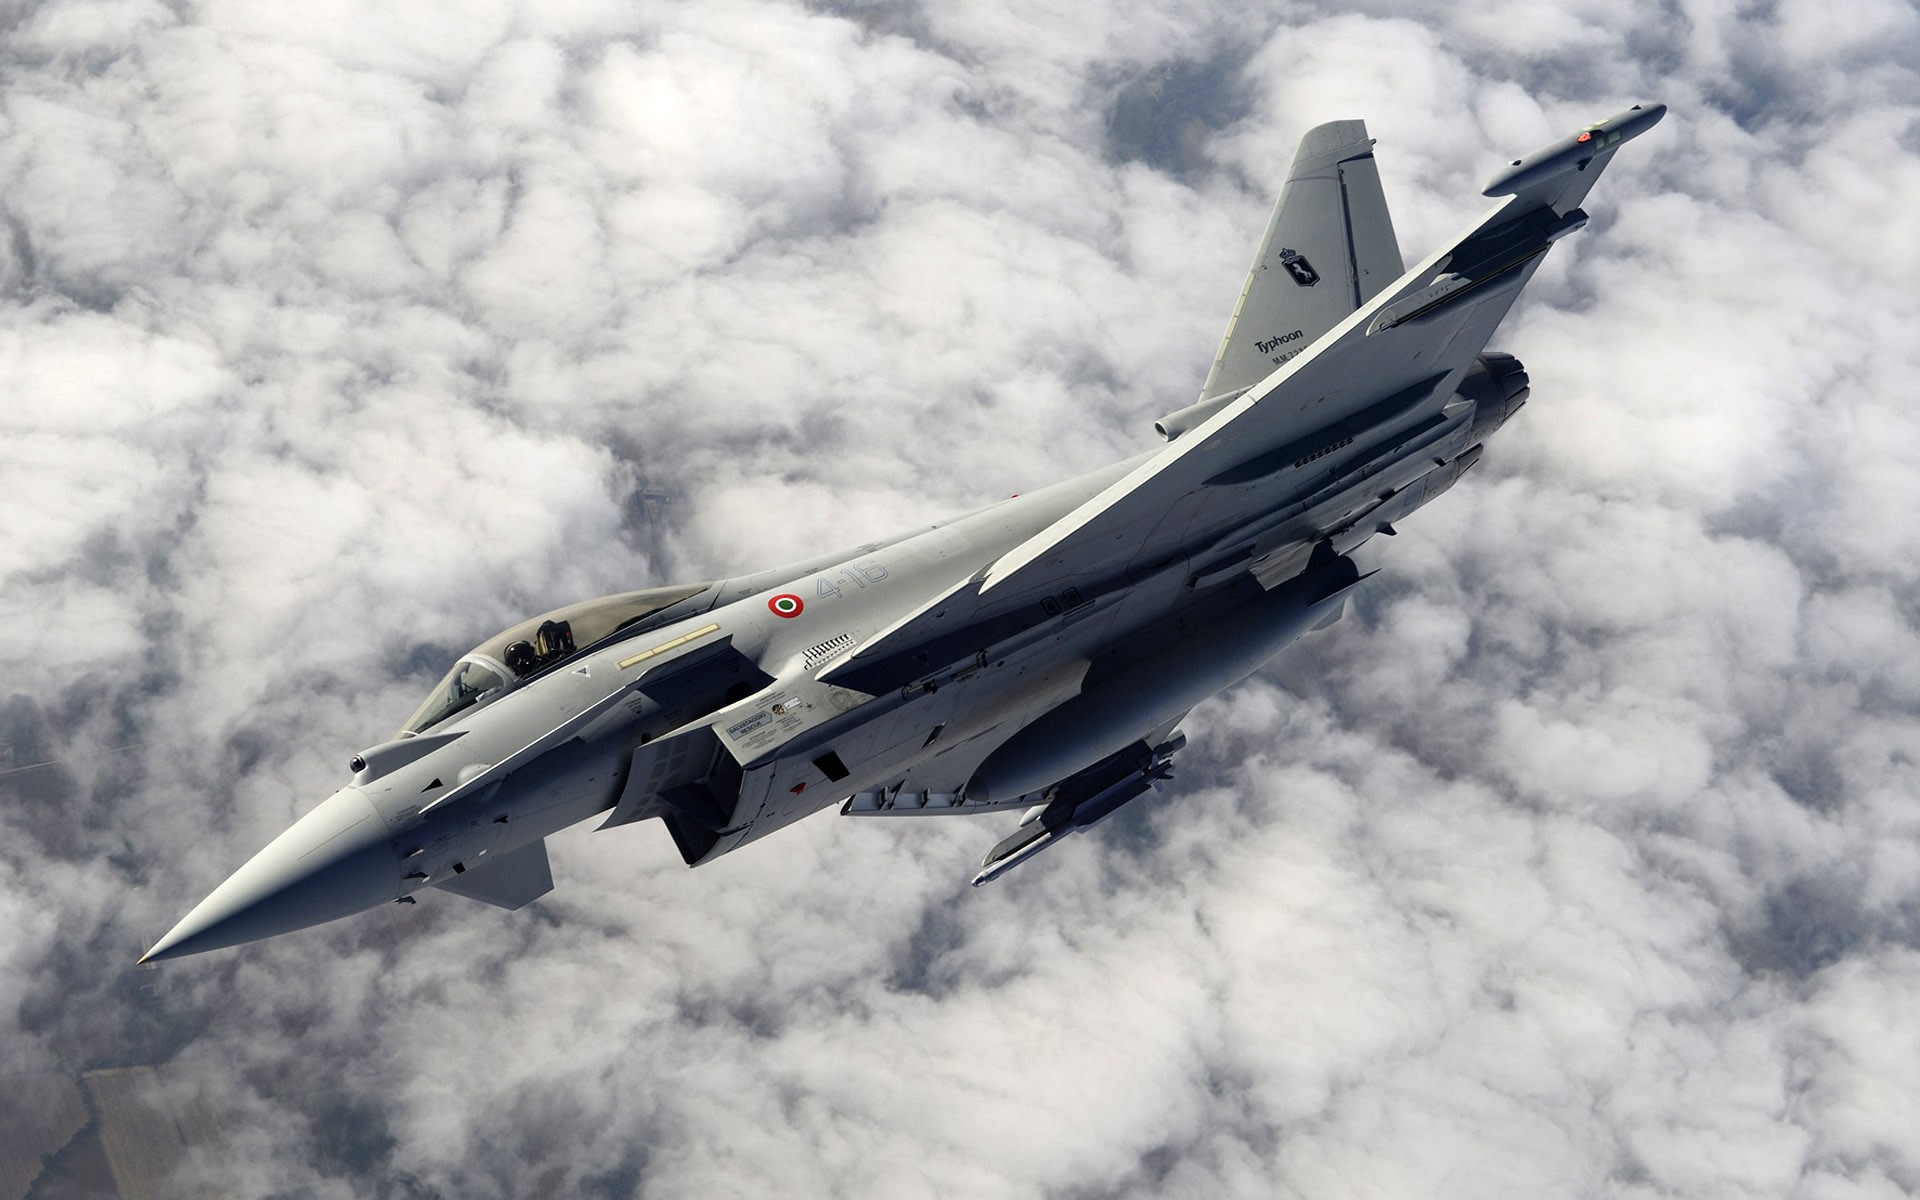 General 1920x1200 aircraft military aircraft vehicle military Eurofighter Typhoon